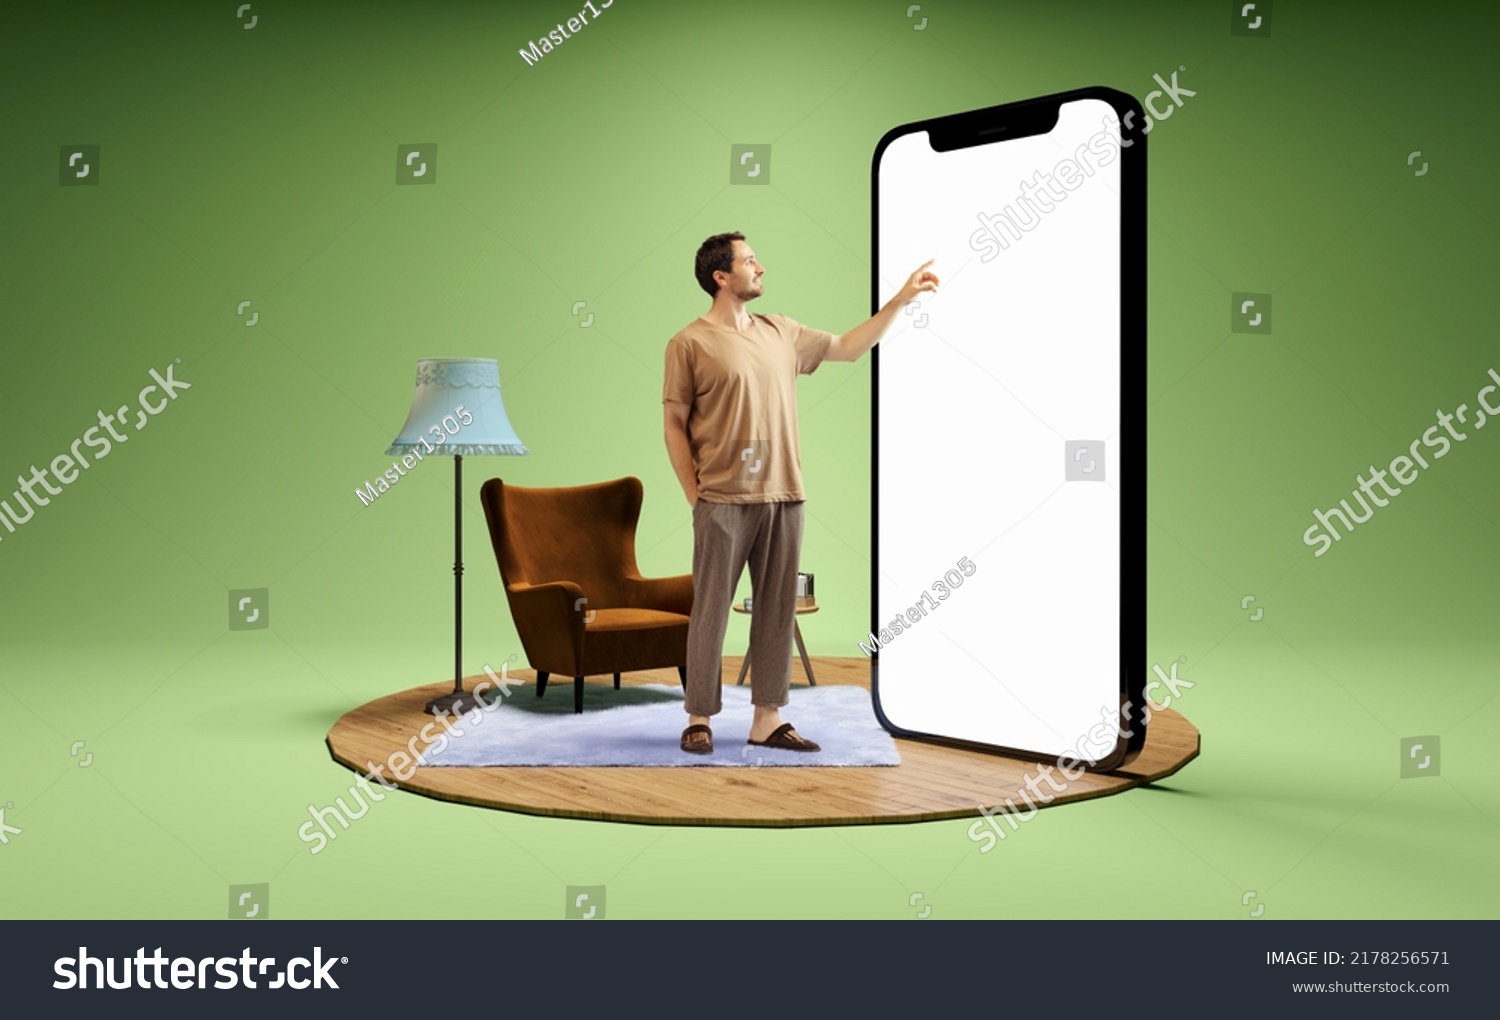 Pointing at device screen. Photo and 3d illustration of man standing next to huge 3d model of smartphone with empty white screen isolated on green background. Mockup for ad, text, design, logo #2178256571